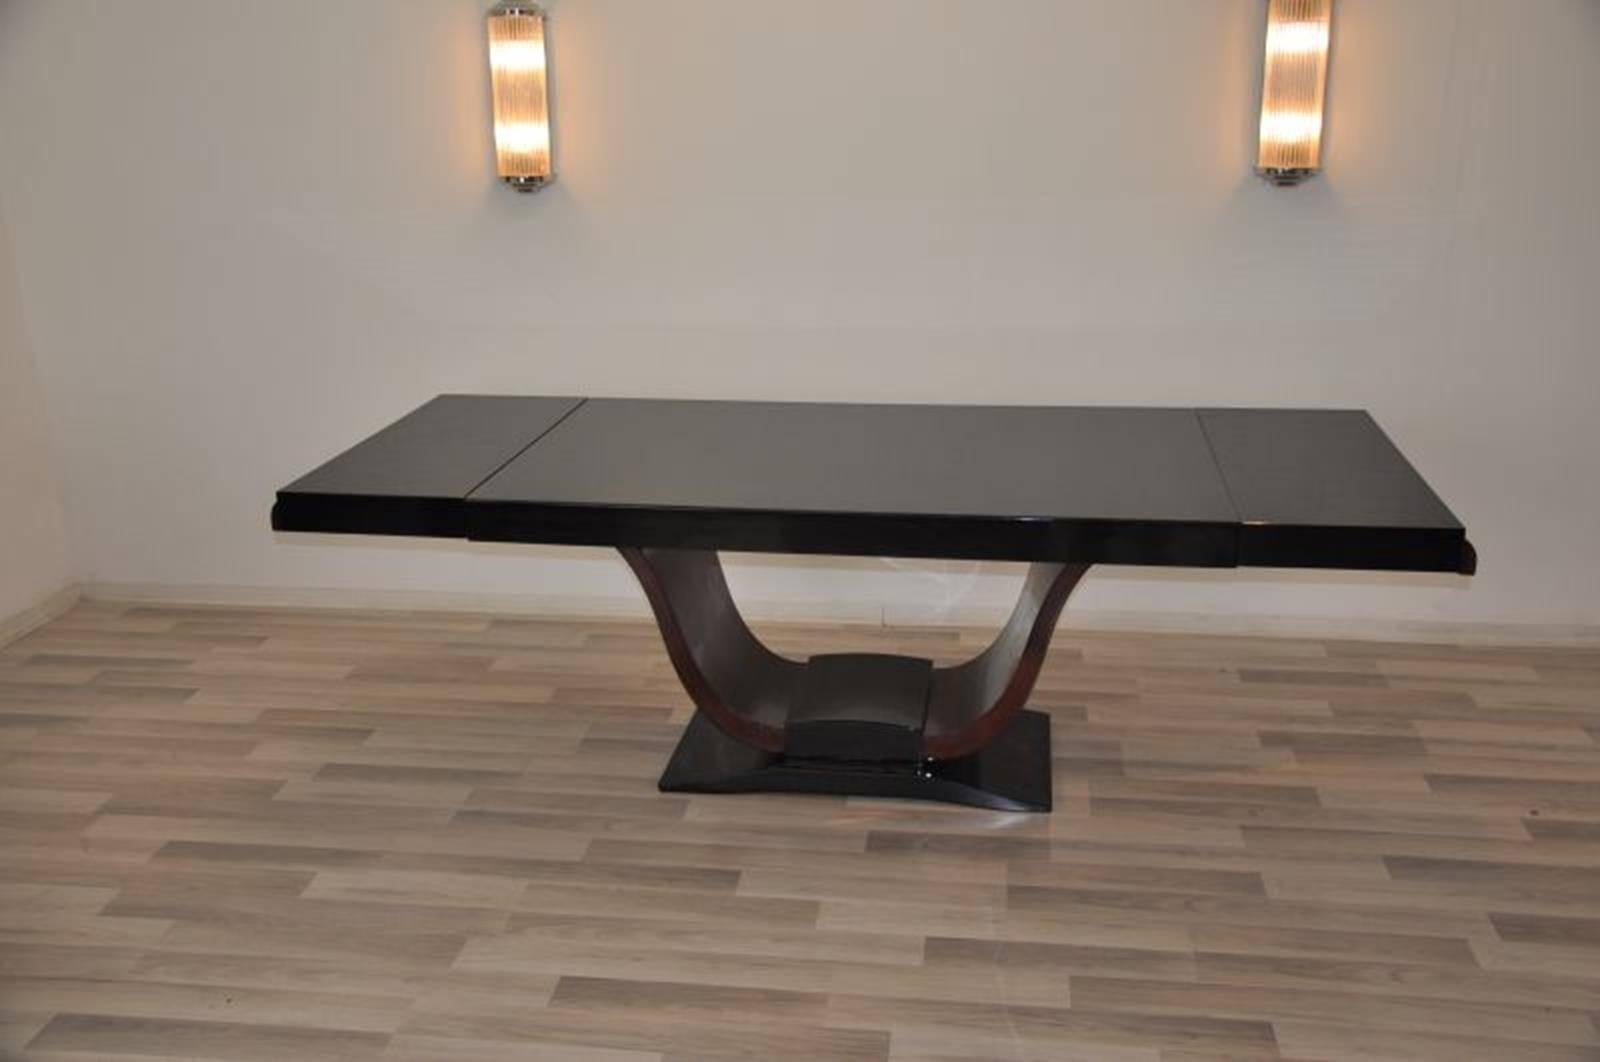 A stunning rosewood dining table expandable up to 91 in. Original single piece from Saarland, Germany. Build in the 1930s it offers a wonderful curved foot that leads to a high gloss black top plate. The floating design makes it a unique and